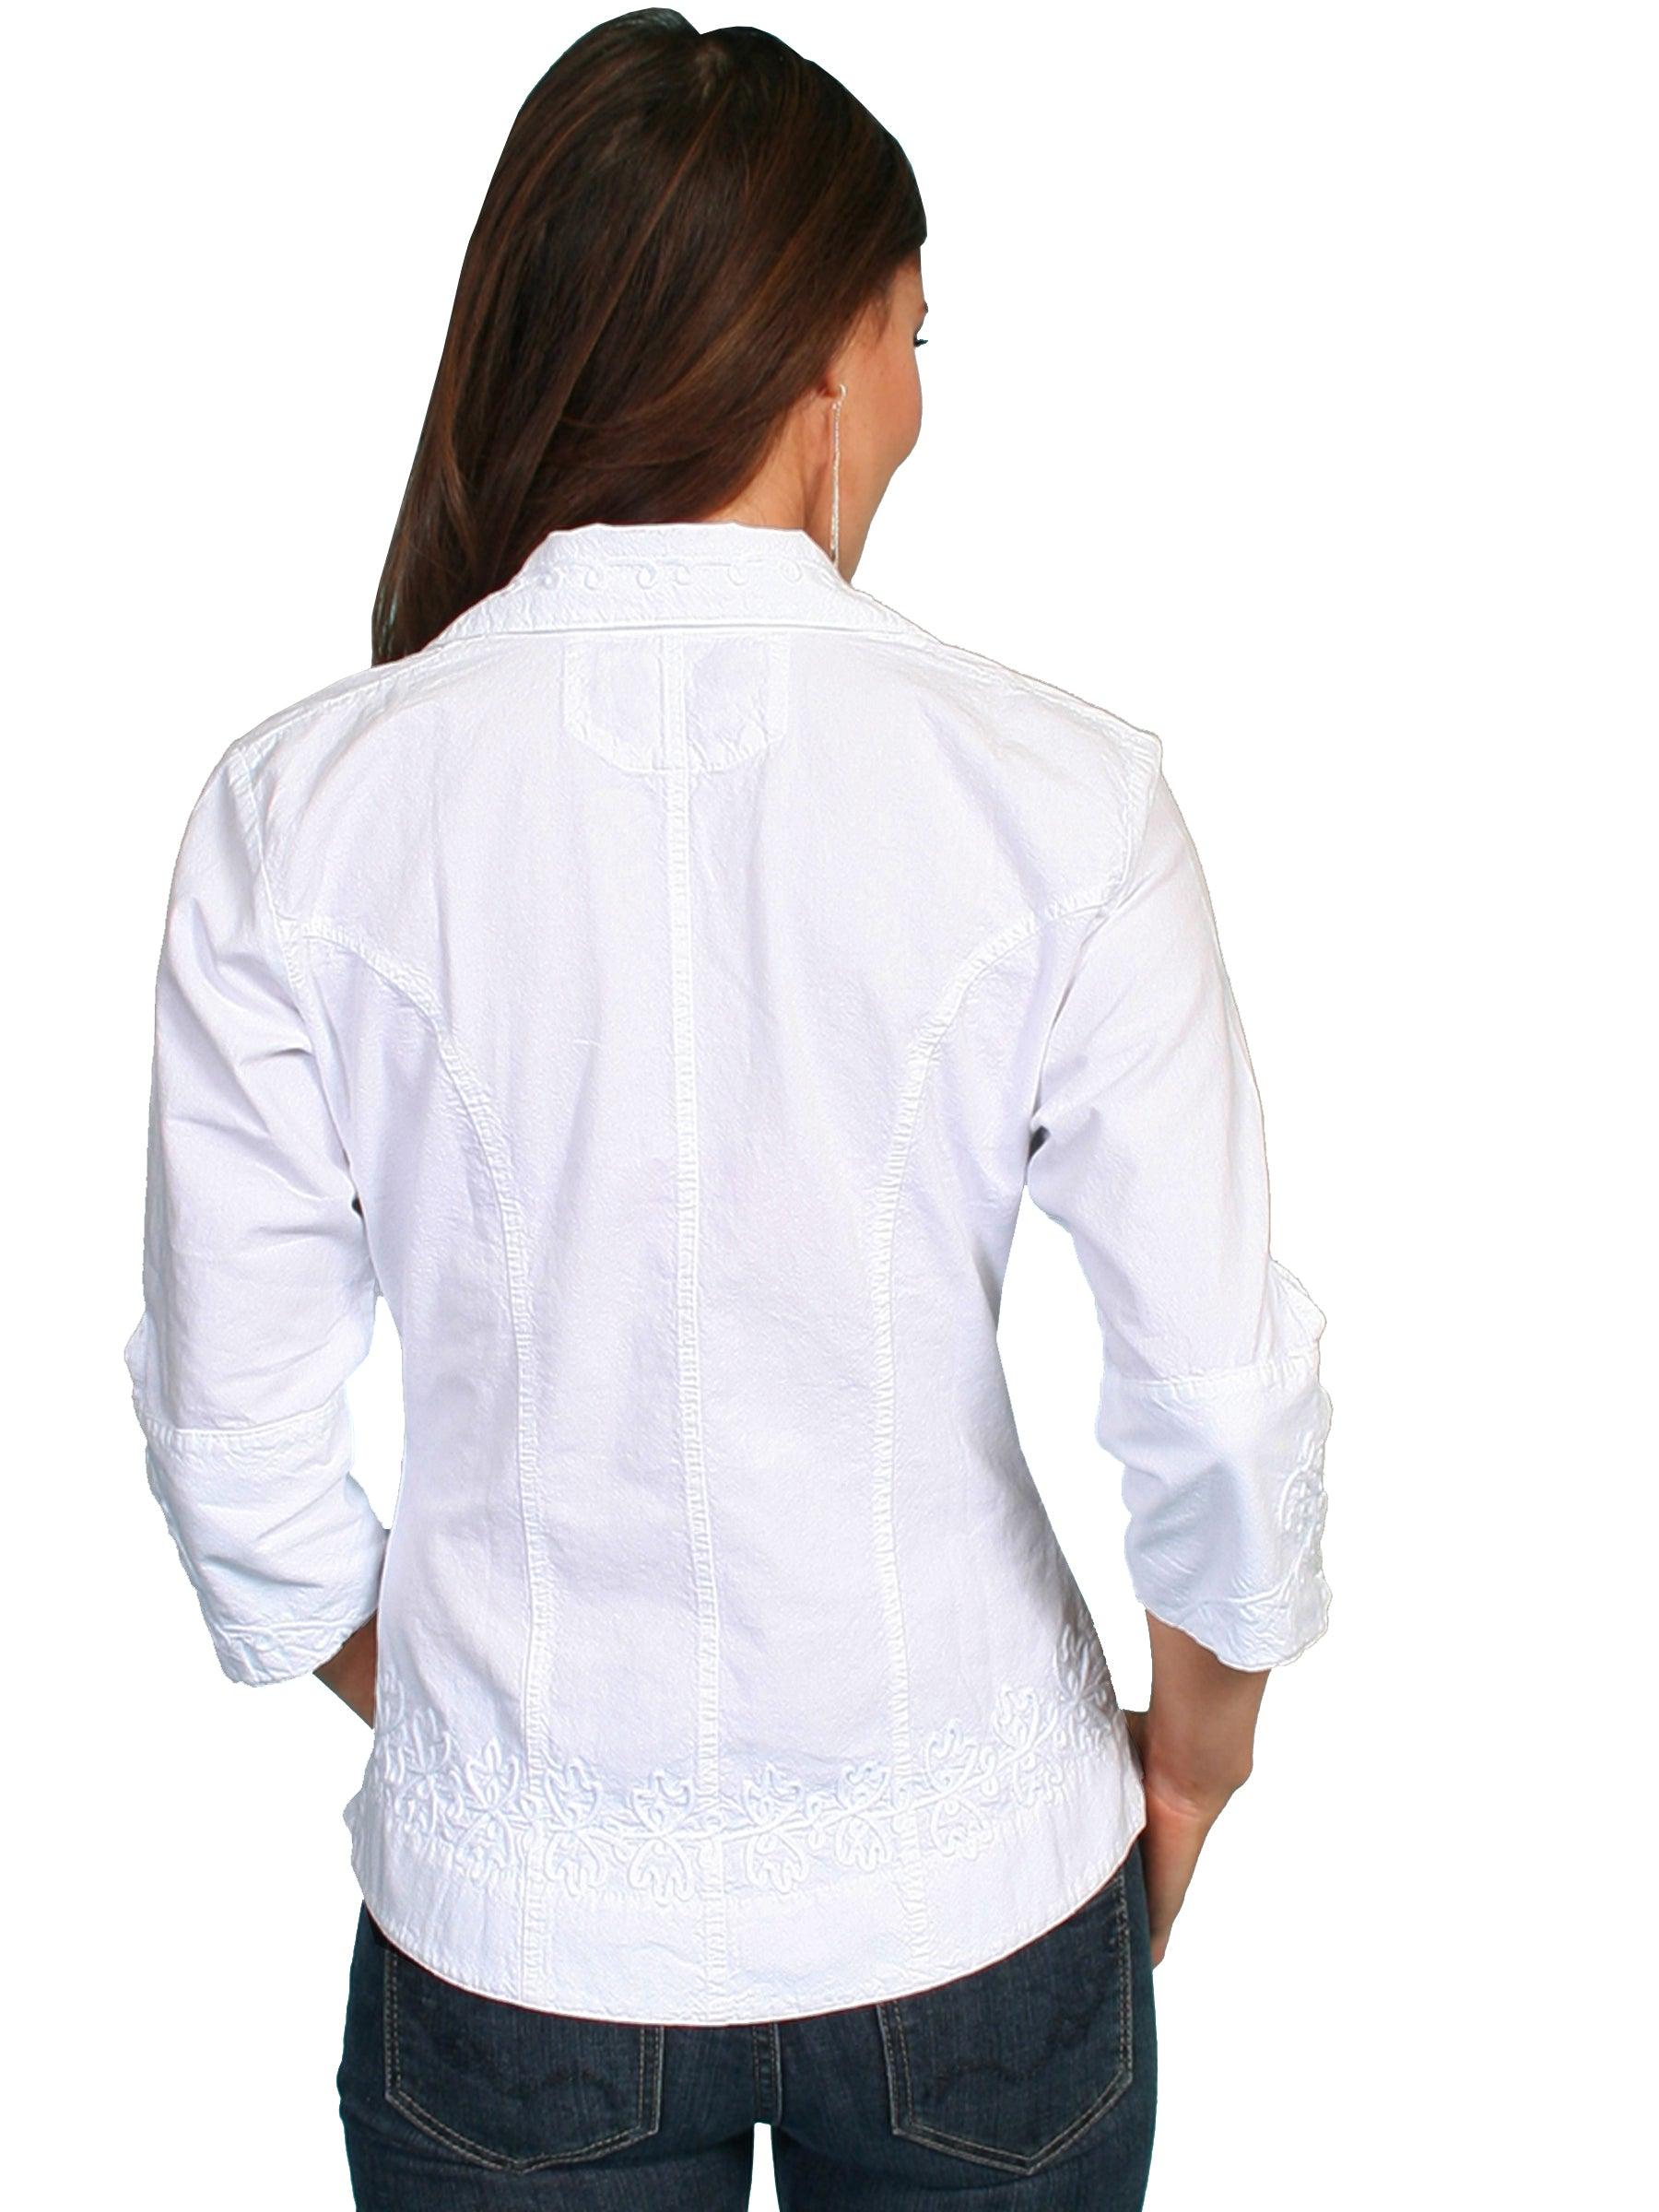 Scully WHITE 3/4 SLEEVE PERUVIAN COTTON BLOUSE - Flyclothing LLC